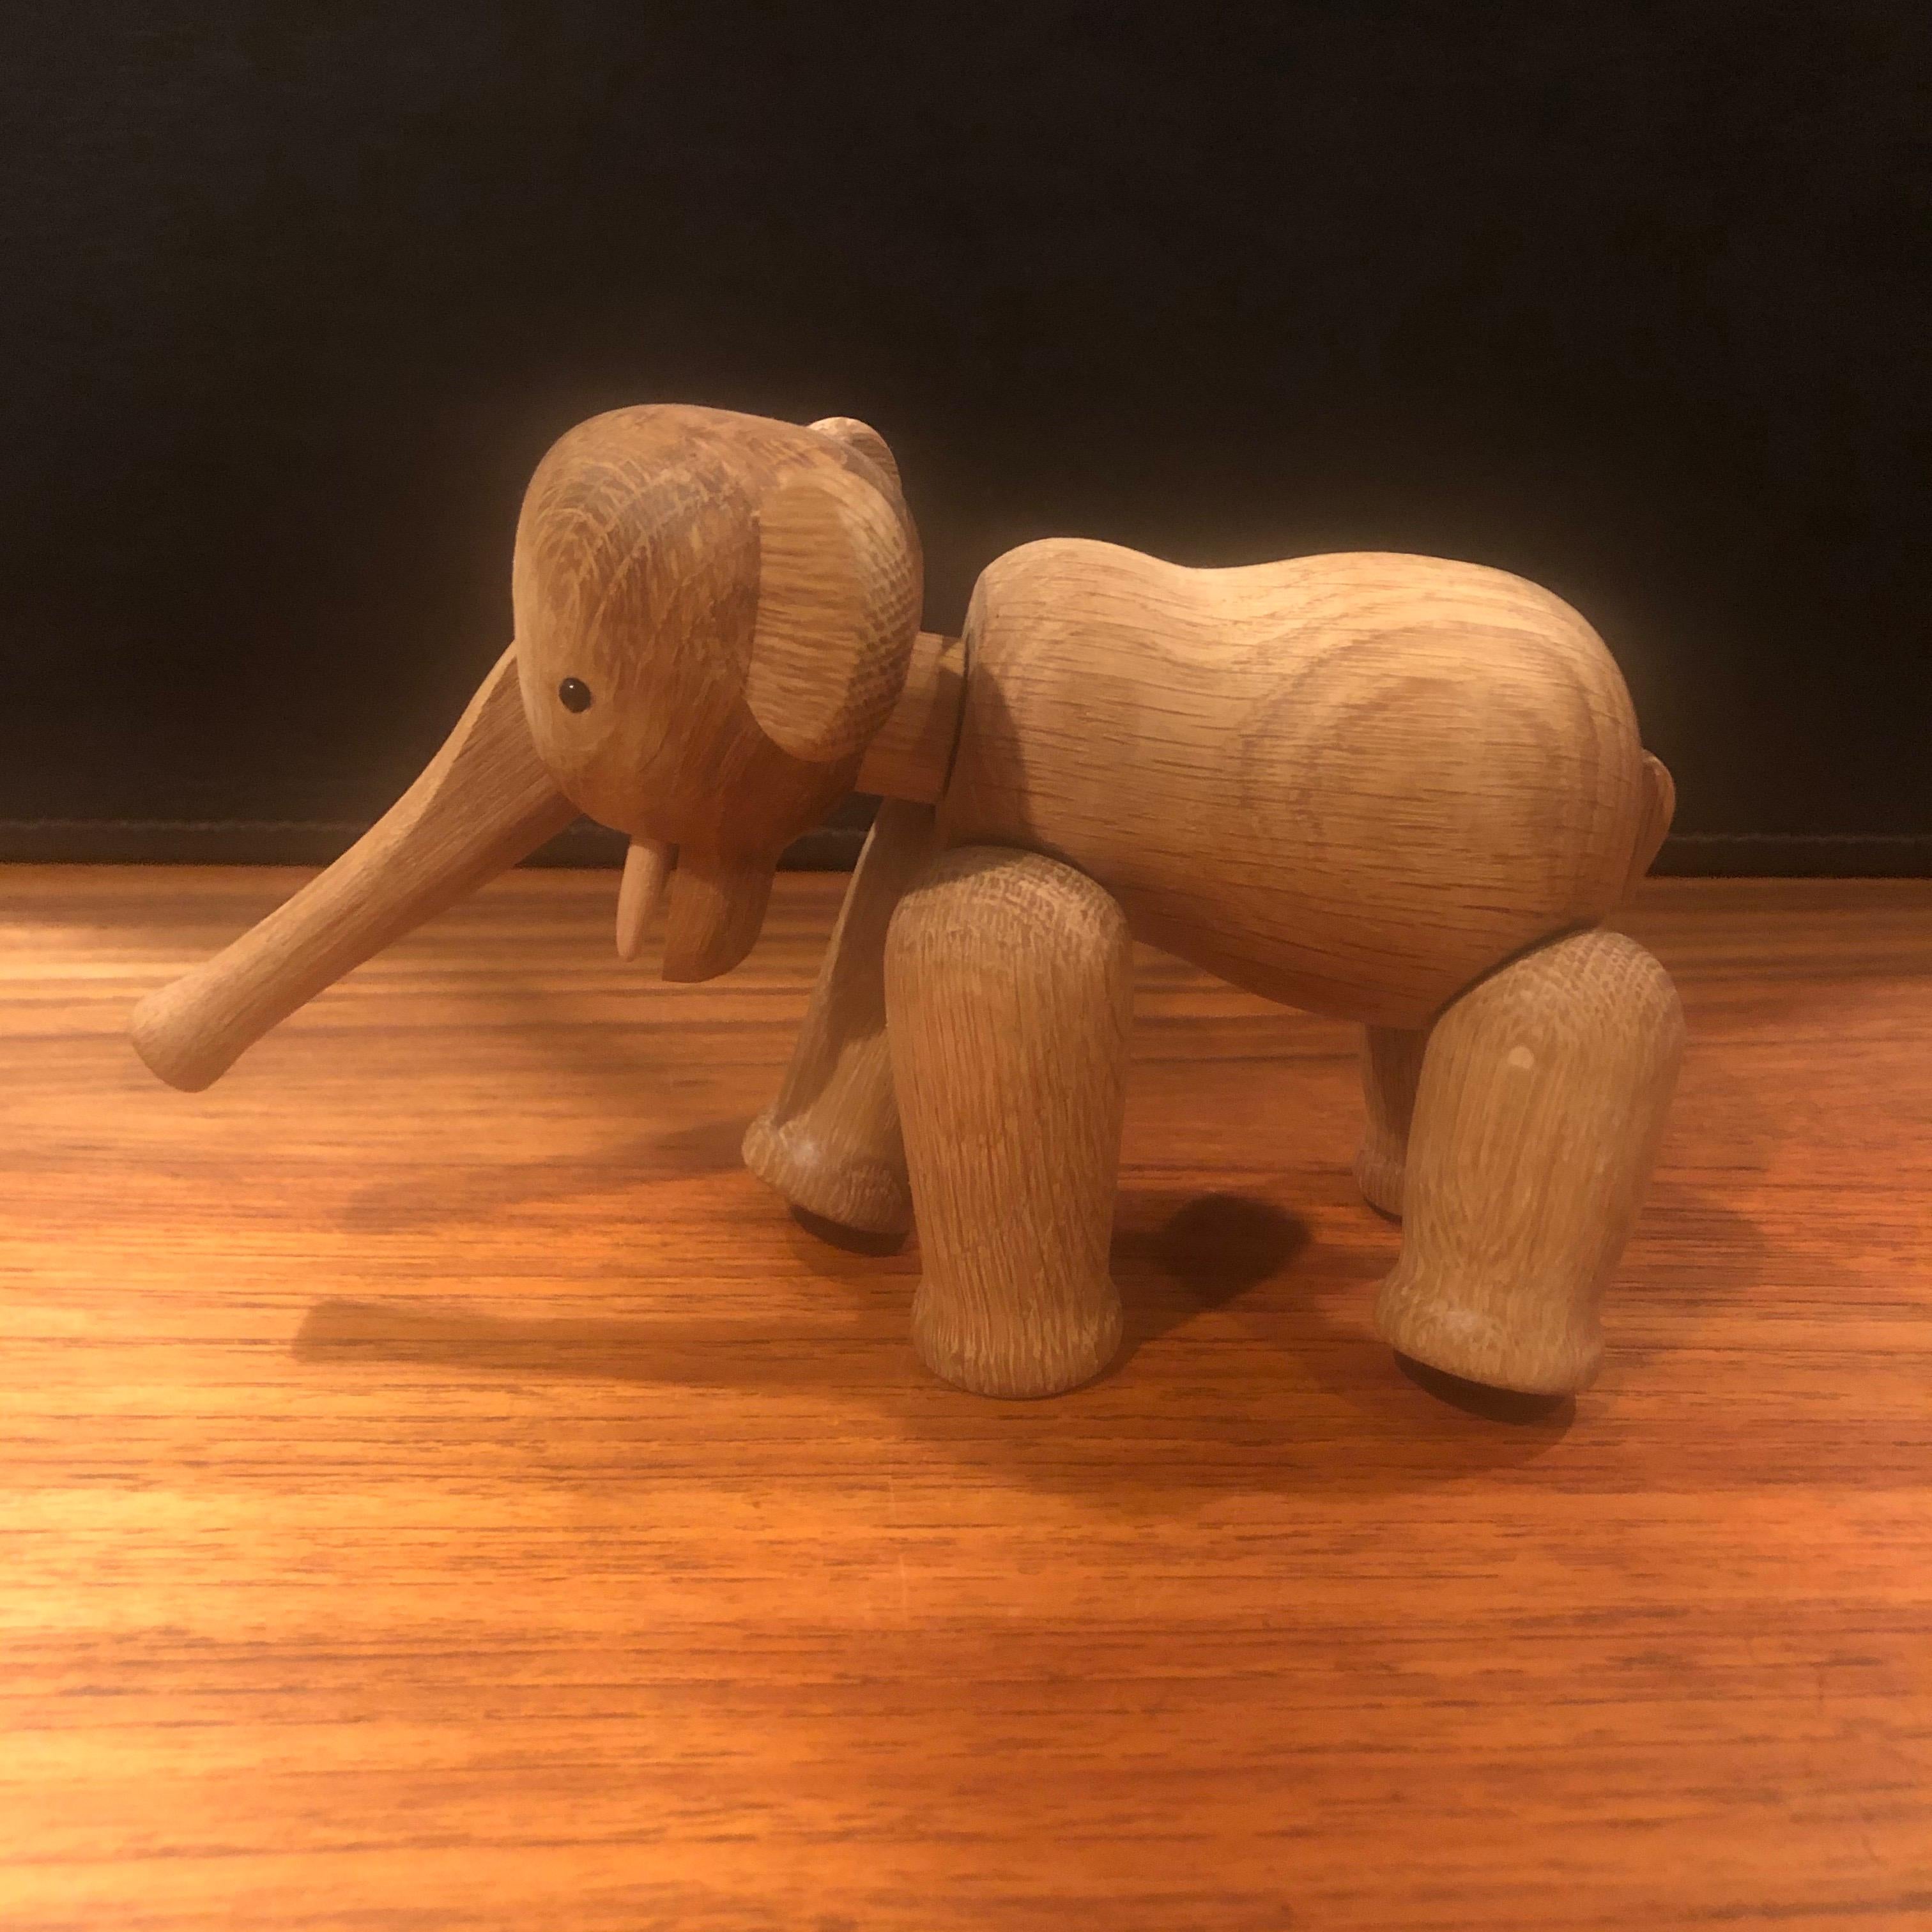 20th Century Articulated Toy Elephant by Kay Bojesen